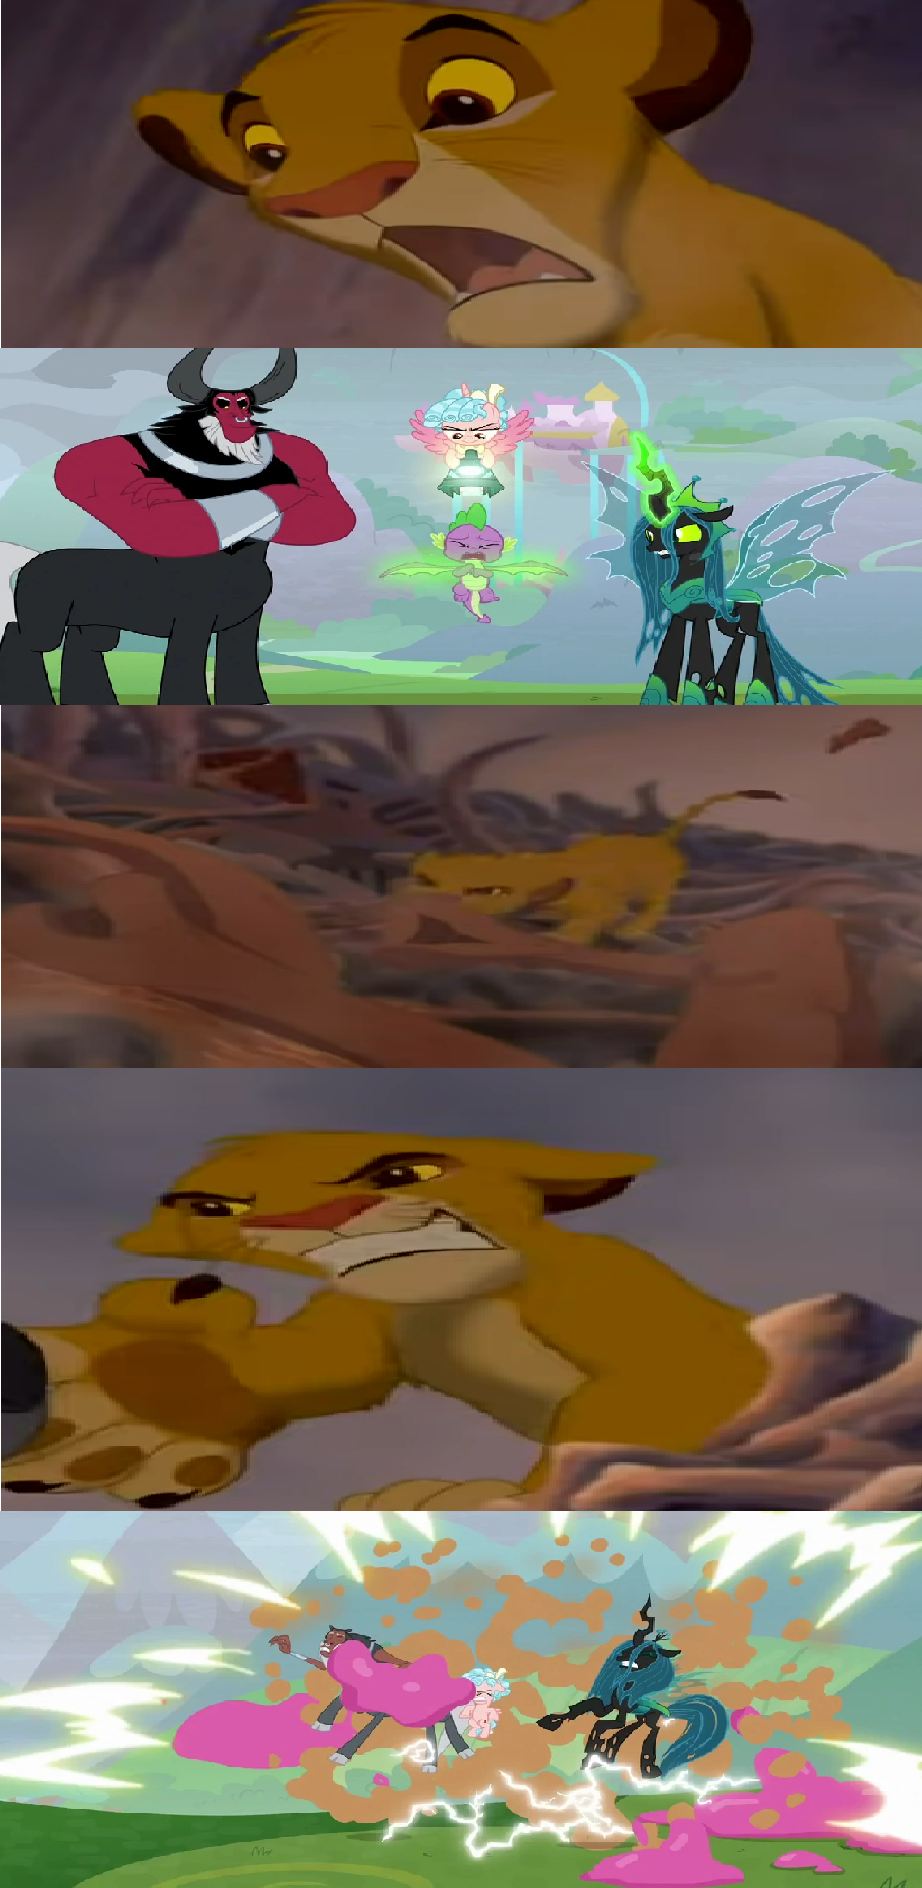 Simba saves Spike and Mane 6 by Disneyponyfan on DeviantArt